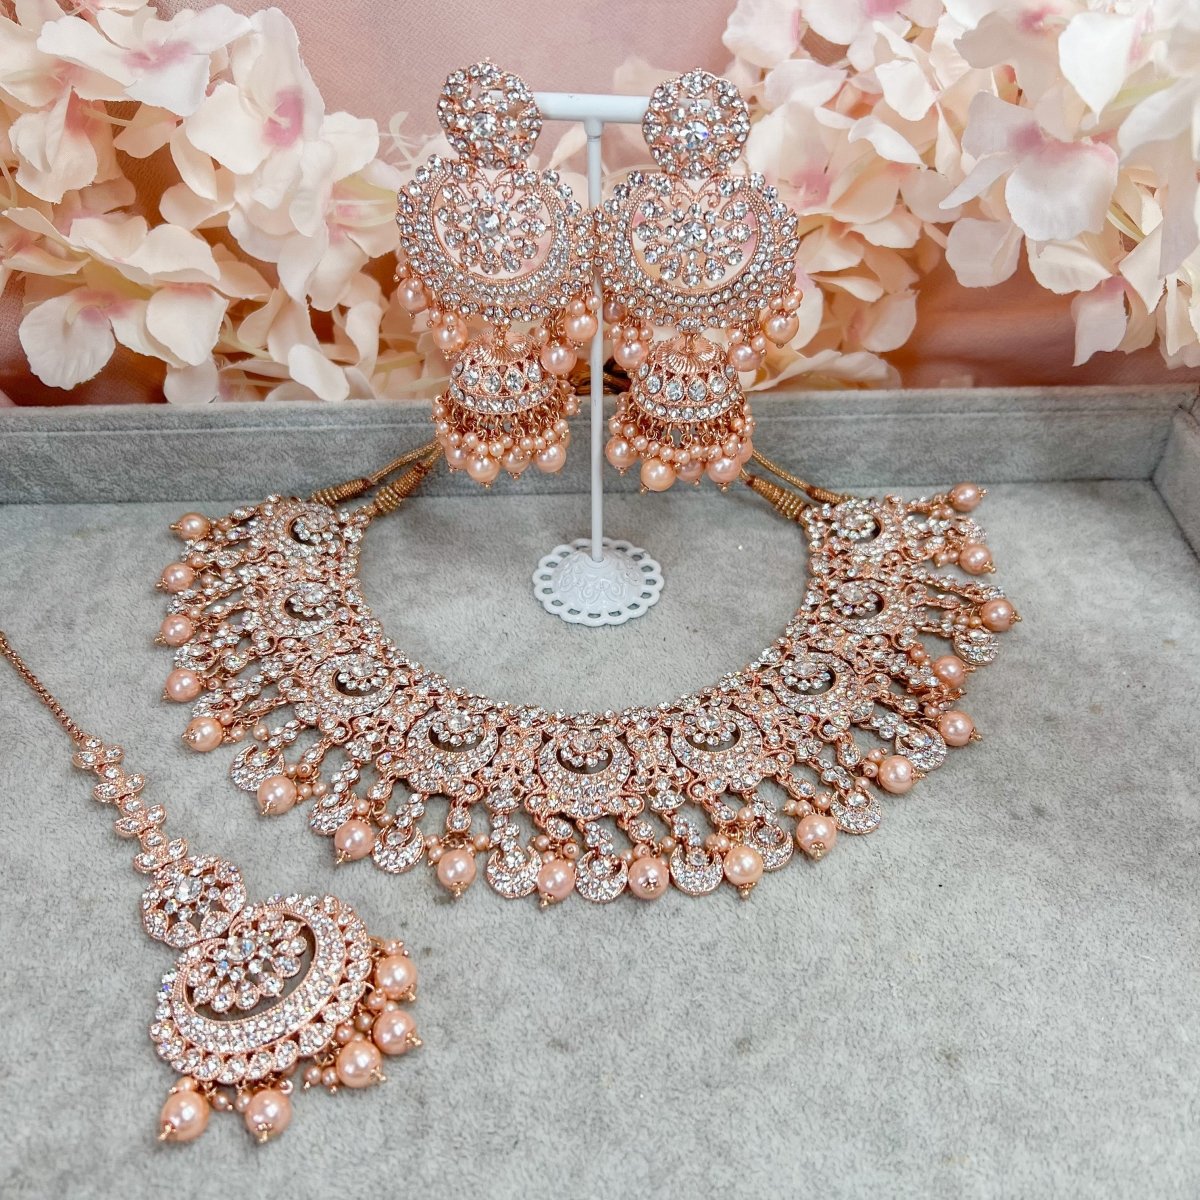 ROSE GOLD Plated Peach Crystal Wedding Jewelry Set Necklace Earrings 8214  Prom | eBay